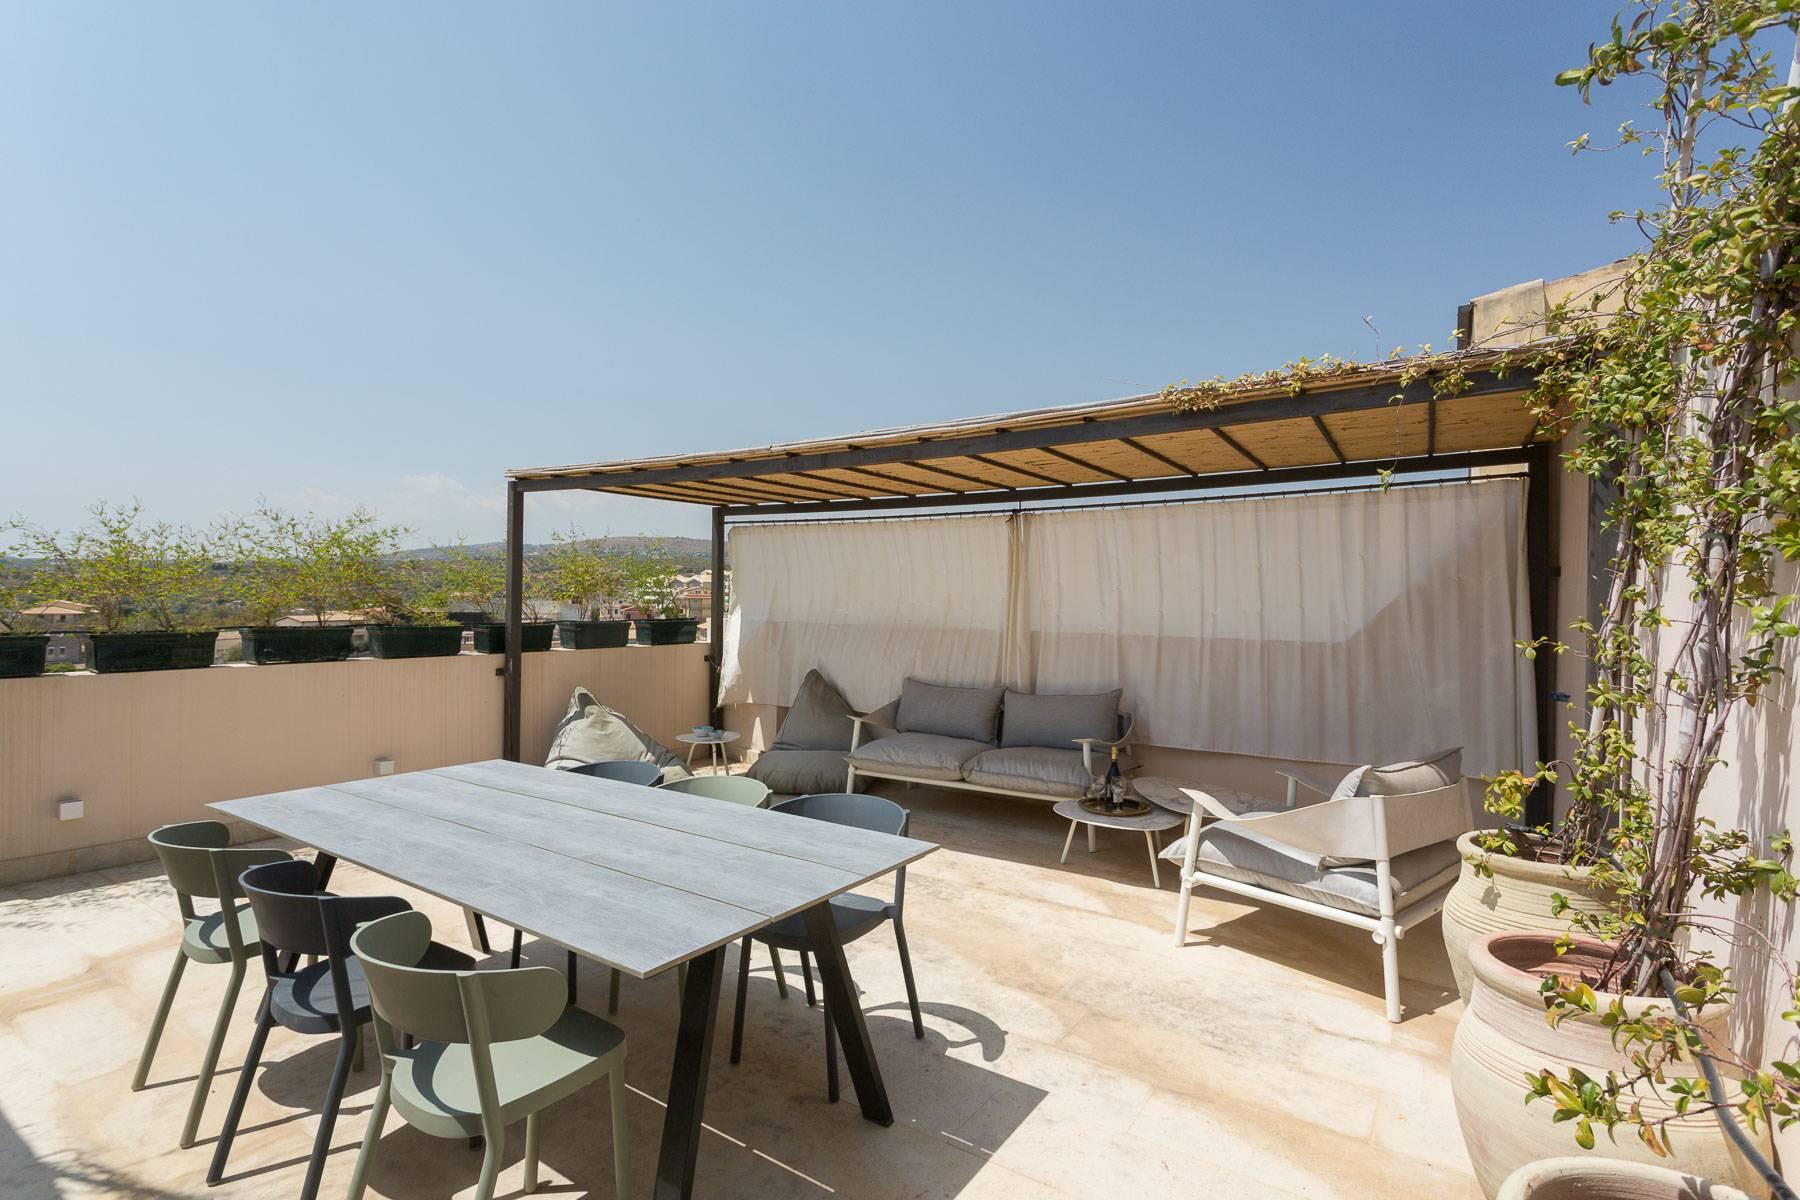 Exclusive Riad in the historic center of Noto - 15